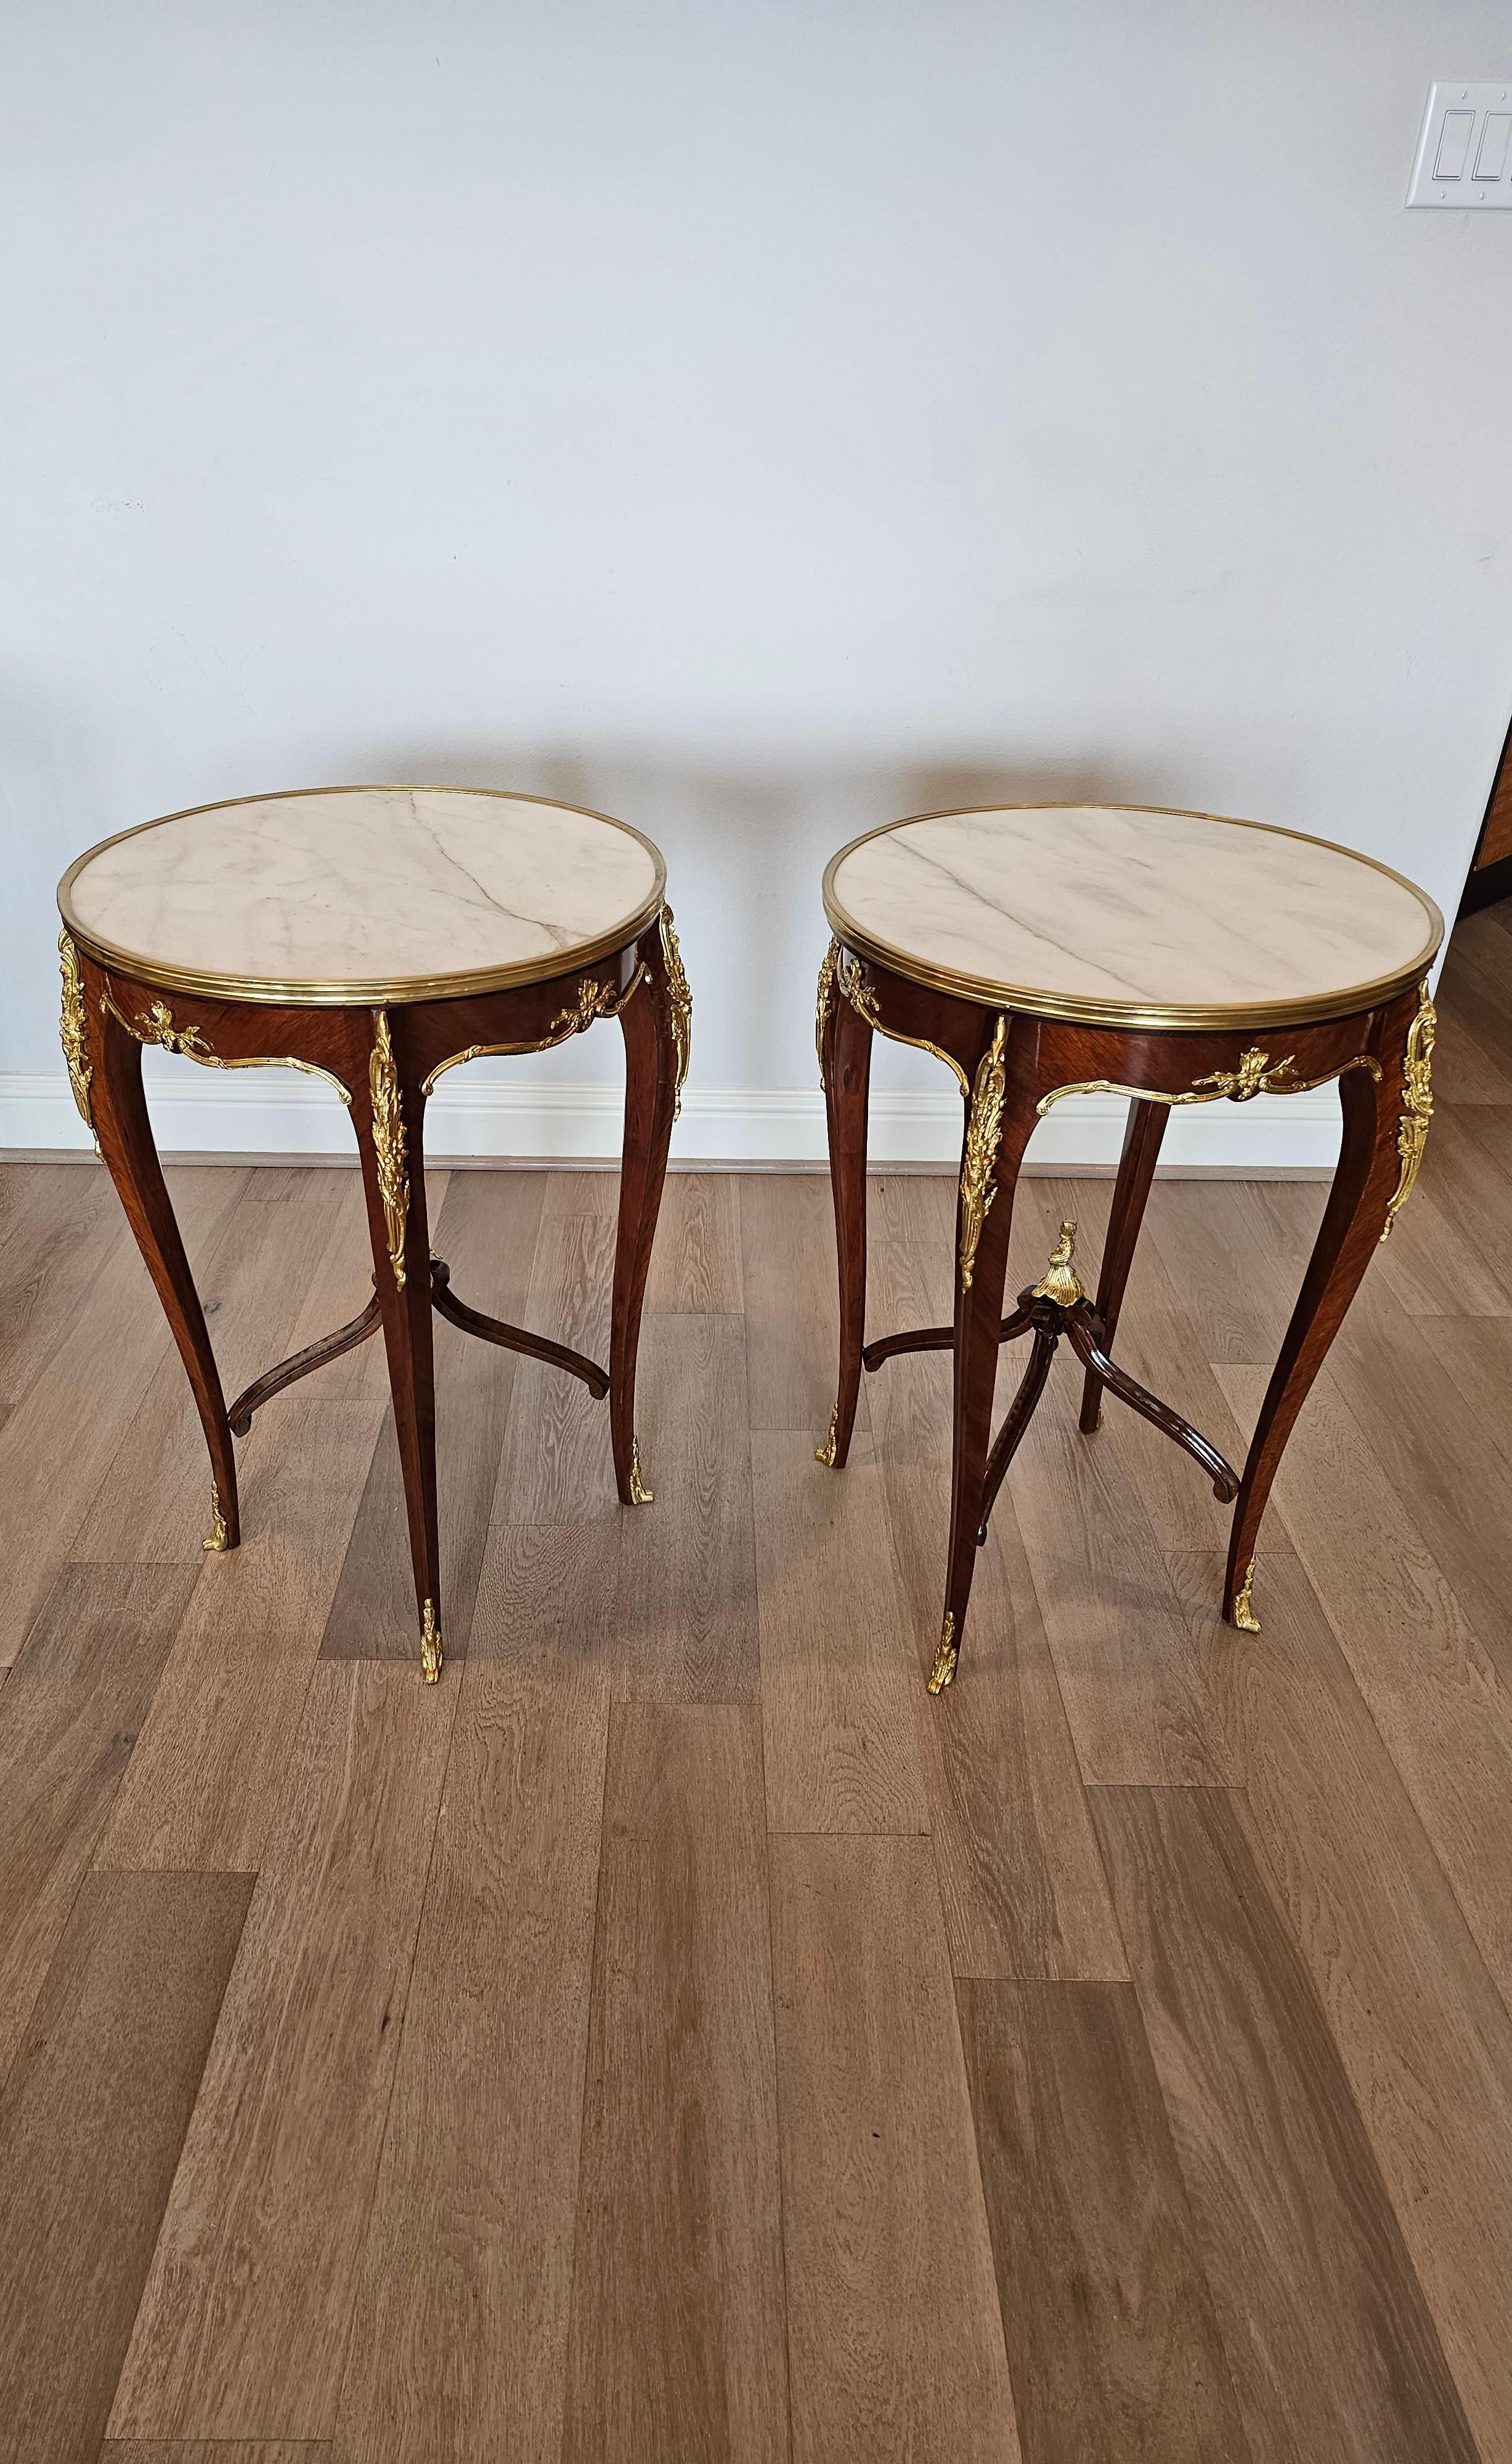 A stunning pair of fine quality French Louis XV style doré bronze mounted kingwood side tables in the manner of famous Parisian ébéniste Francois Linke (1855-1946) and bronze sculptor Léon Messagé (1842-1901).

Exquisitely hand-crafted in the 20th